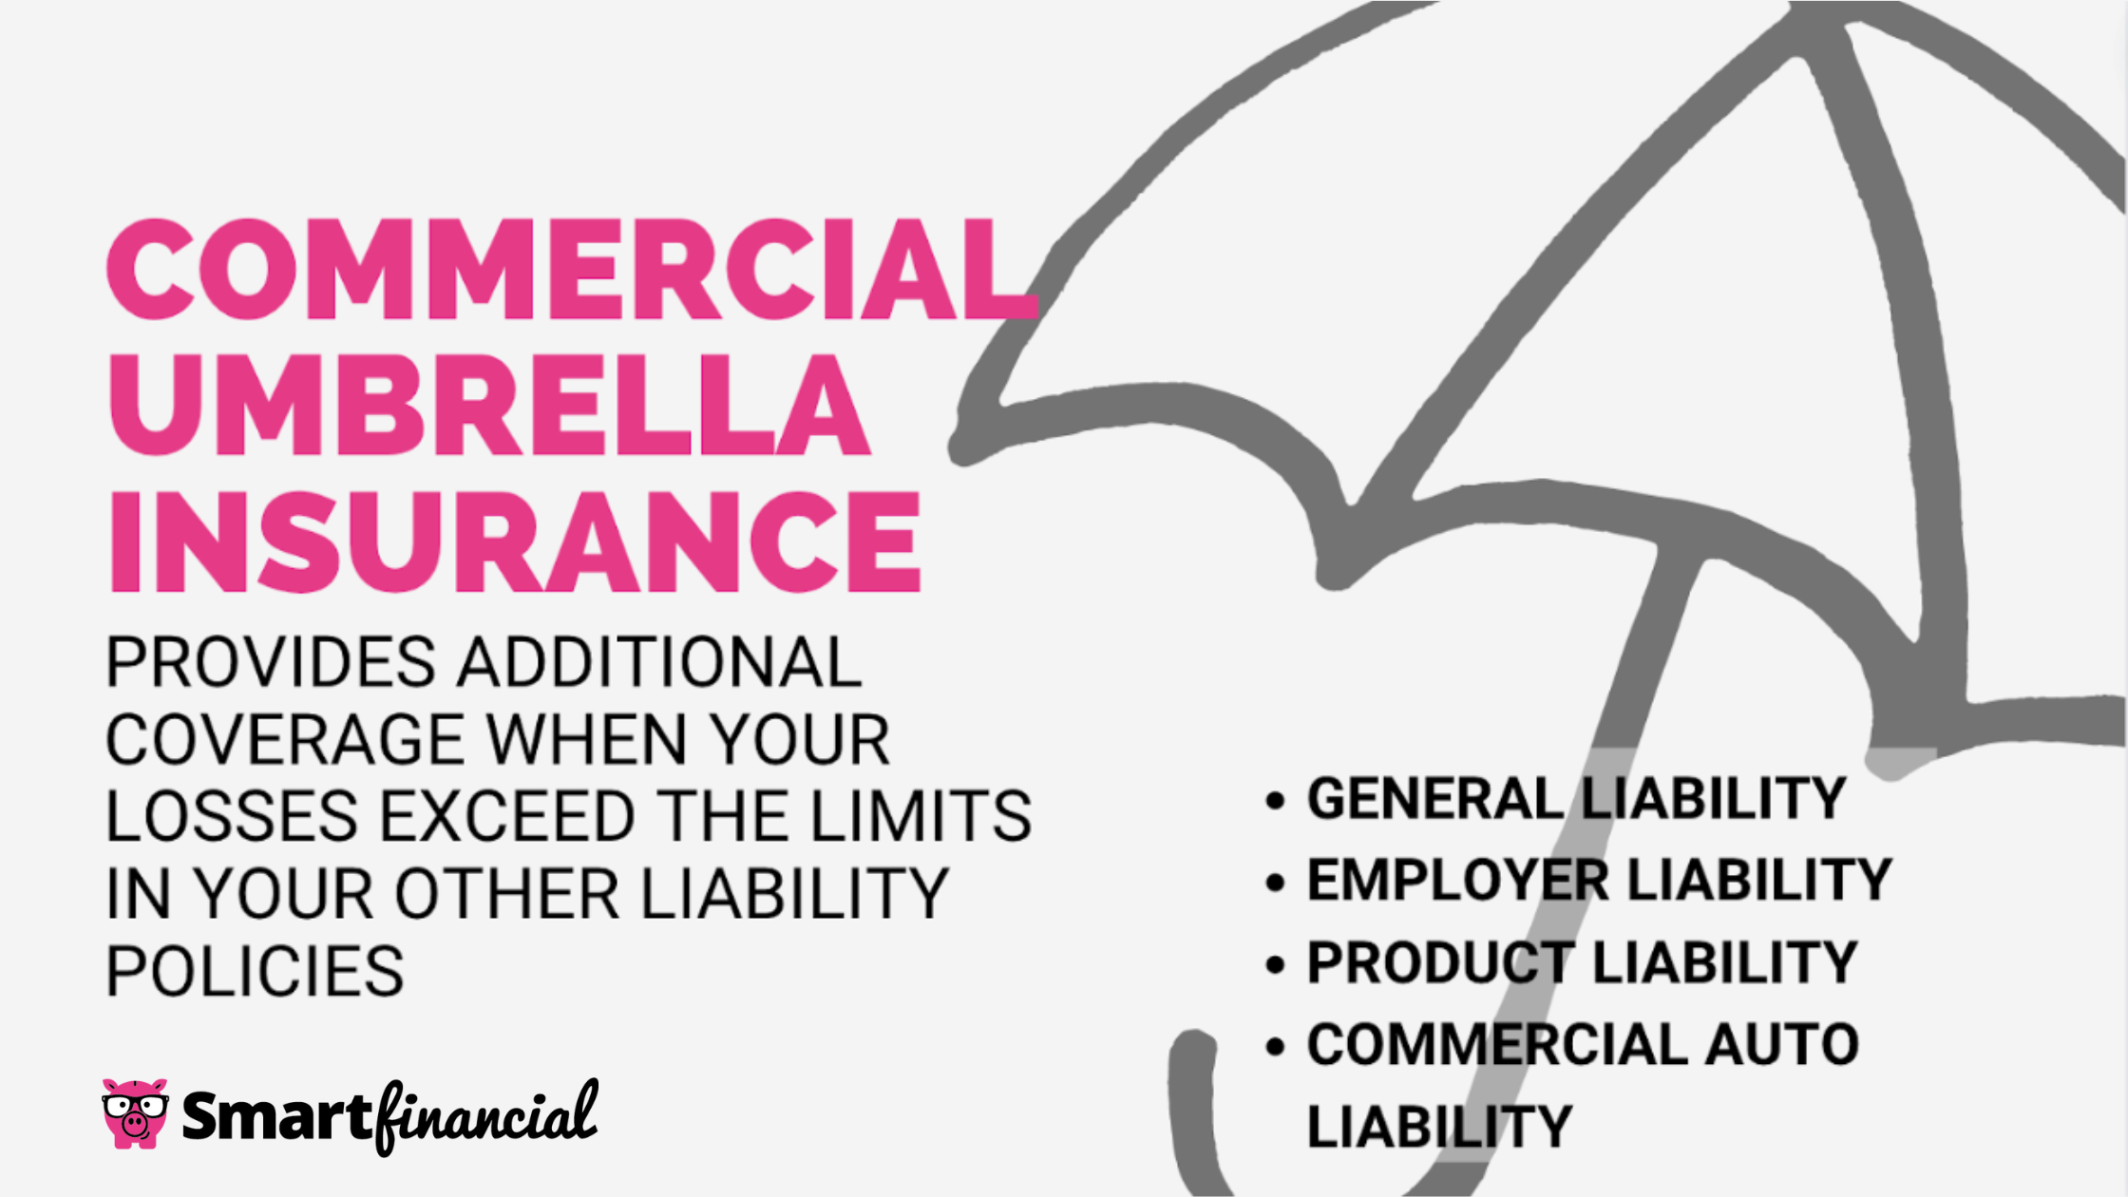 an umbrella policy is designed to cover Bulan 4 What Is Commercial Umbrella Insurance?  SmartFinancial